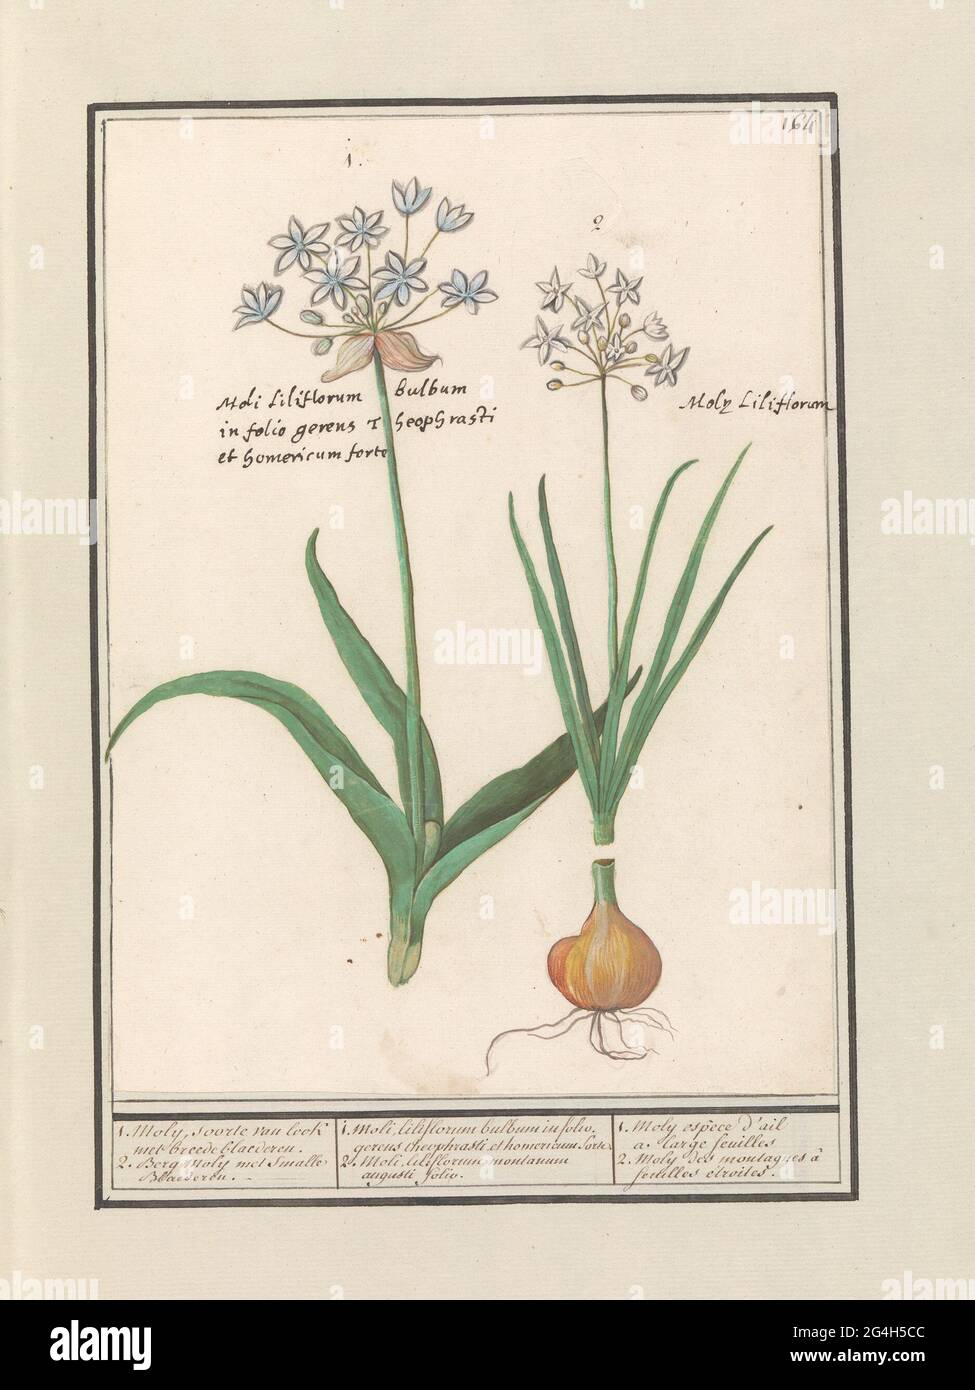 Daslook (Allium Ursinum); 1. MOLY, LOOD OF LOOK WITH BREED BLADER. 2. MOUNT MOLY with narrow leaves. / 1. Moli Liliforum Bulbum in Folio. Huis Cheophasti et Homericum Sorte. 2. Moli Liliforum Montanum Augusti Folio. / 1. MOLY ESPÈCE D'AIL A LARGE FEUILLES 2. Moly des Montagnes à Feuilles Etroits. Daslook. At the top right numbered: 164. With the flowers the Latin names. Part of the second album with drawings of flowers and plants. Ninth of twelve albums with drawings of animals, birds and plants known around 1600, made by Emperor Rudolf II. With explanation in Dutch, Latin and French. Stock Photo